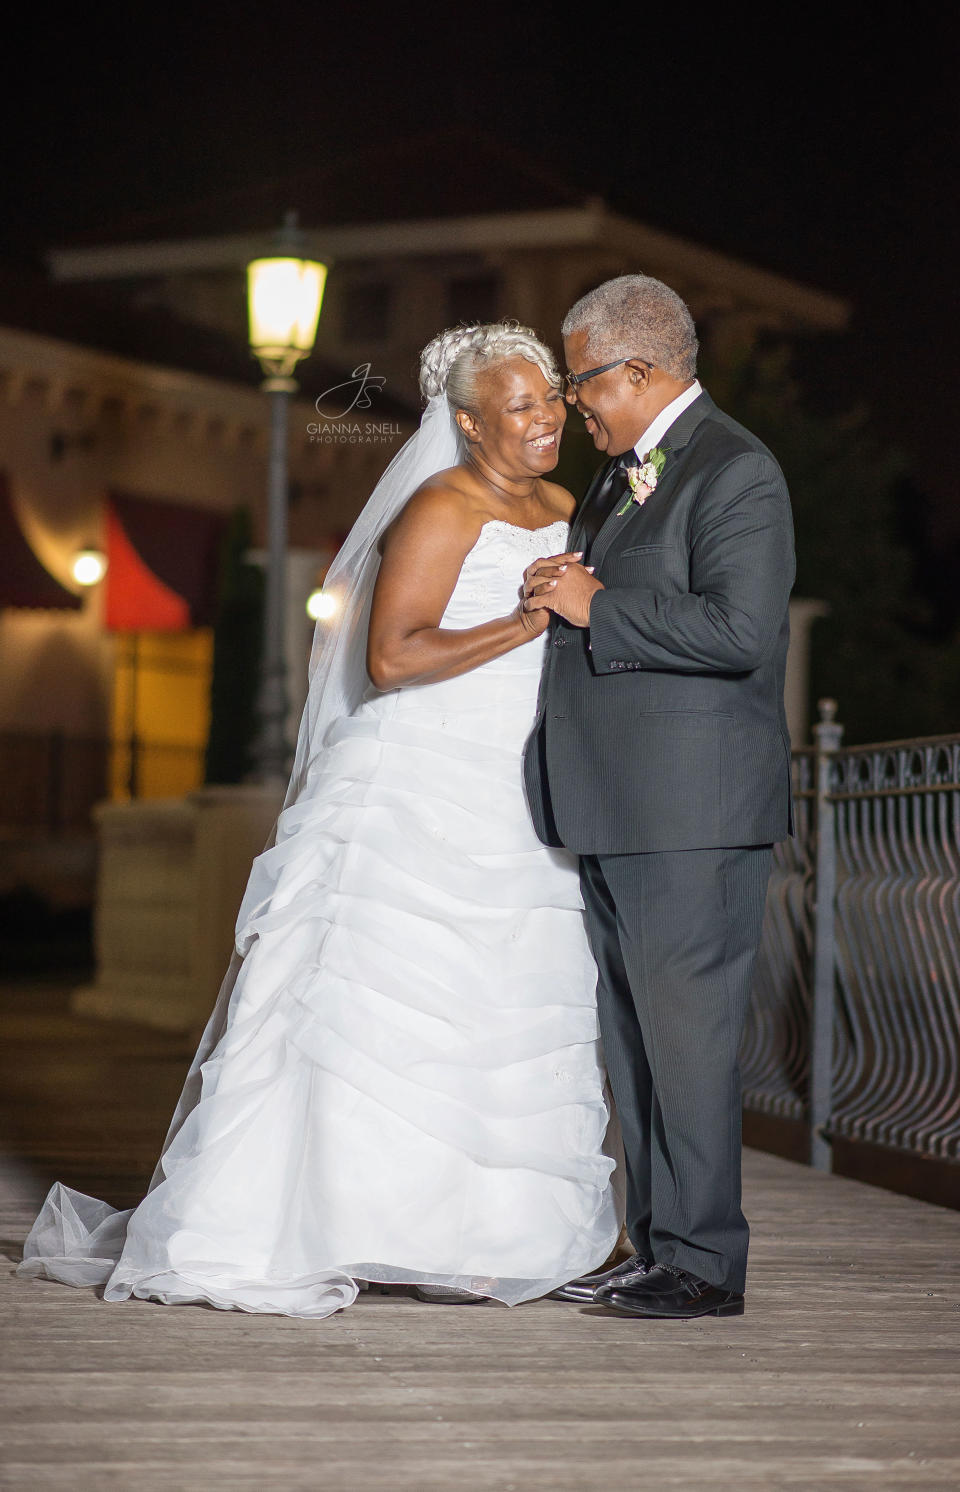 The couple told their photographer they feel&nbsp;like they've known each other forever. "They told me that they talk for hours every day that they don&rsquo;t need TV or other forms of entertainment to entertain them." (Photo: <a href="http://www.giannasnellphotography.com/" target="_blank">Gianna Snell Photography</a>)